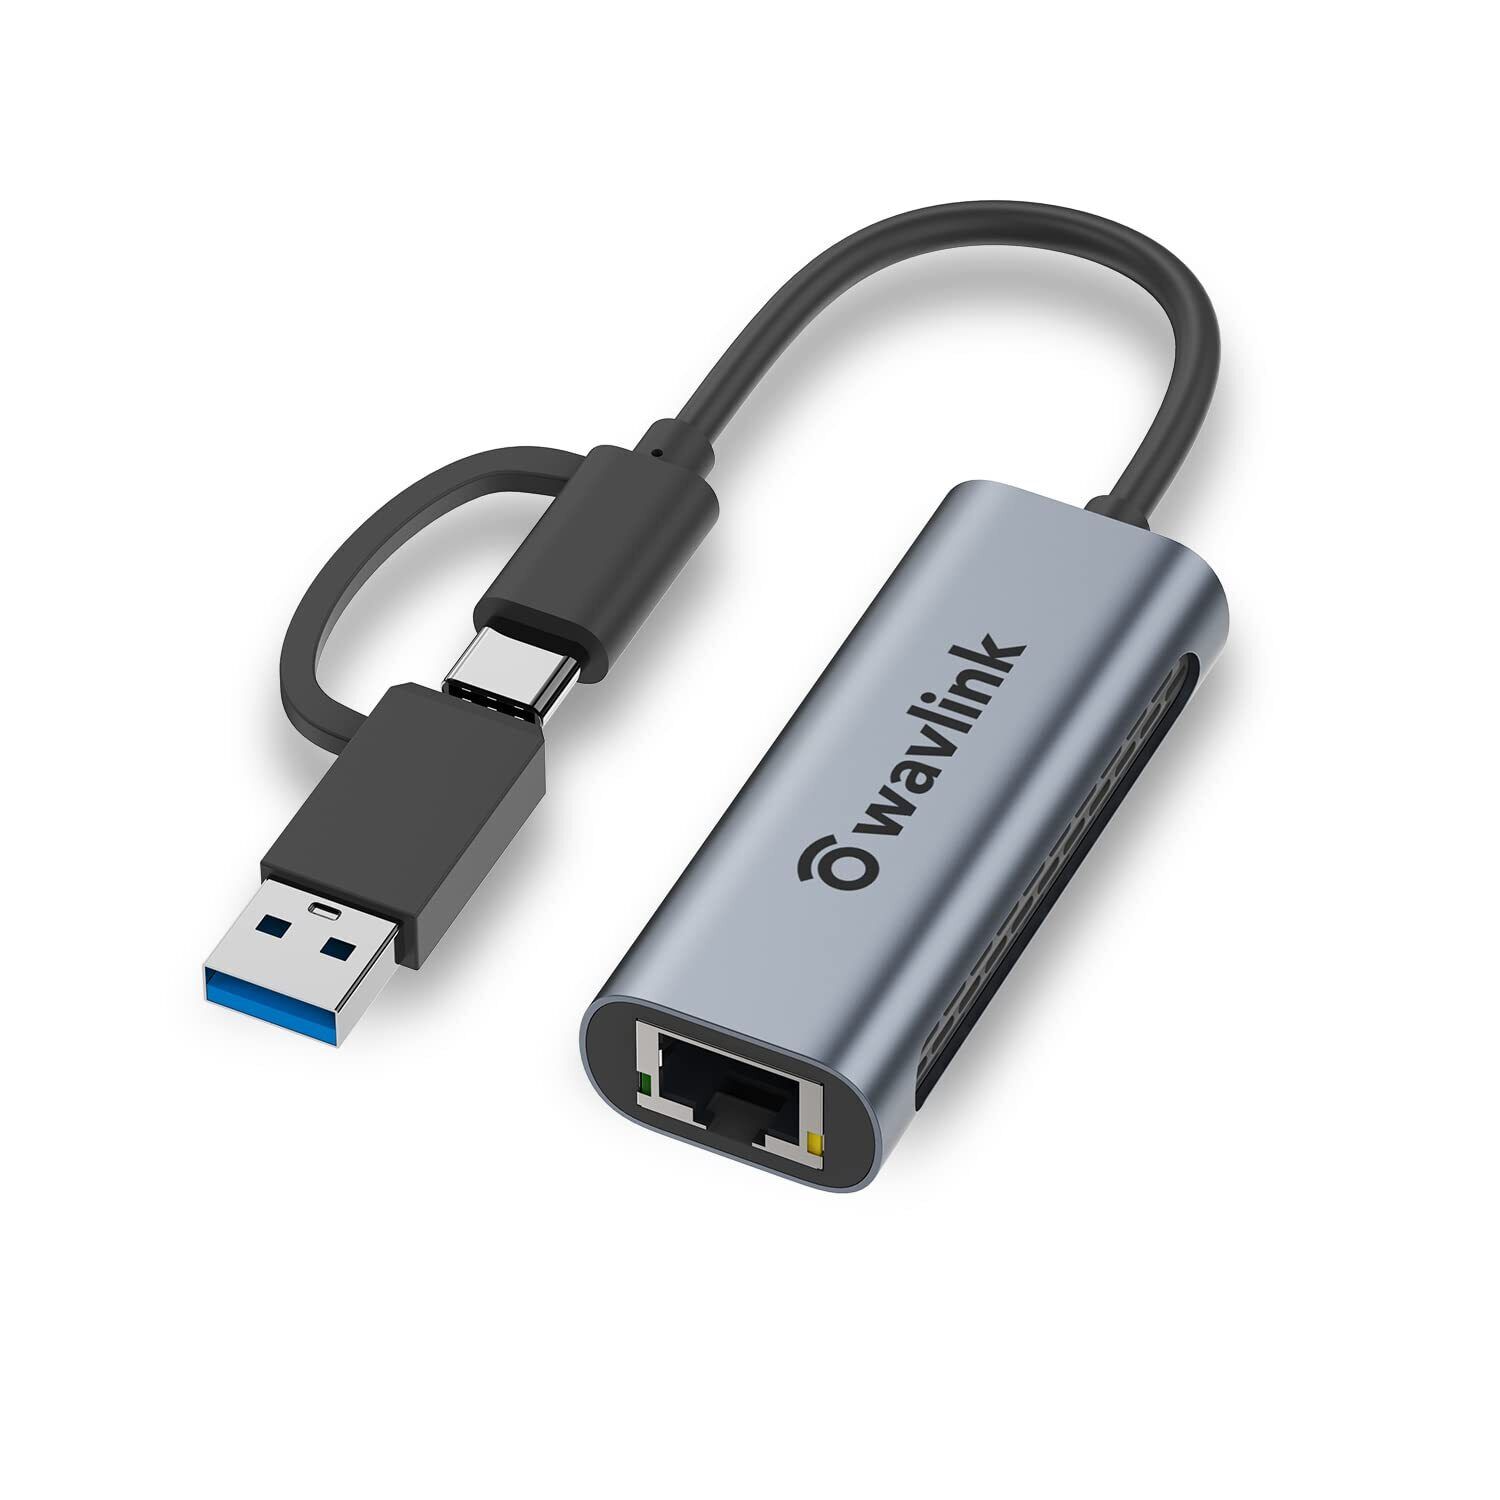 WAVLINK USB to 2.5G Ethernet Adapter, 2-in-1 USB C/USB 3.0 Ethernet Adapter fo